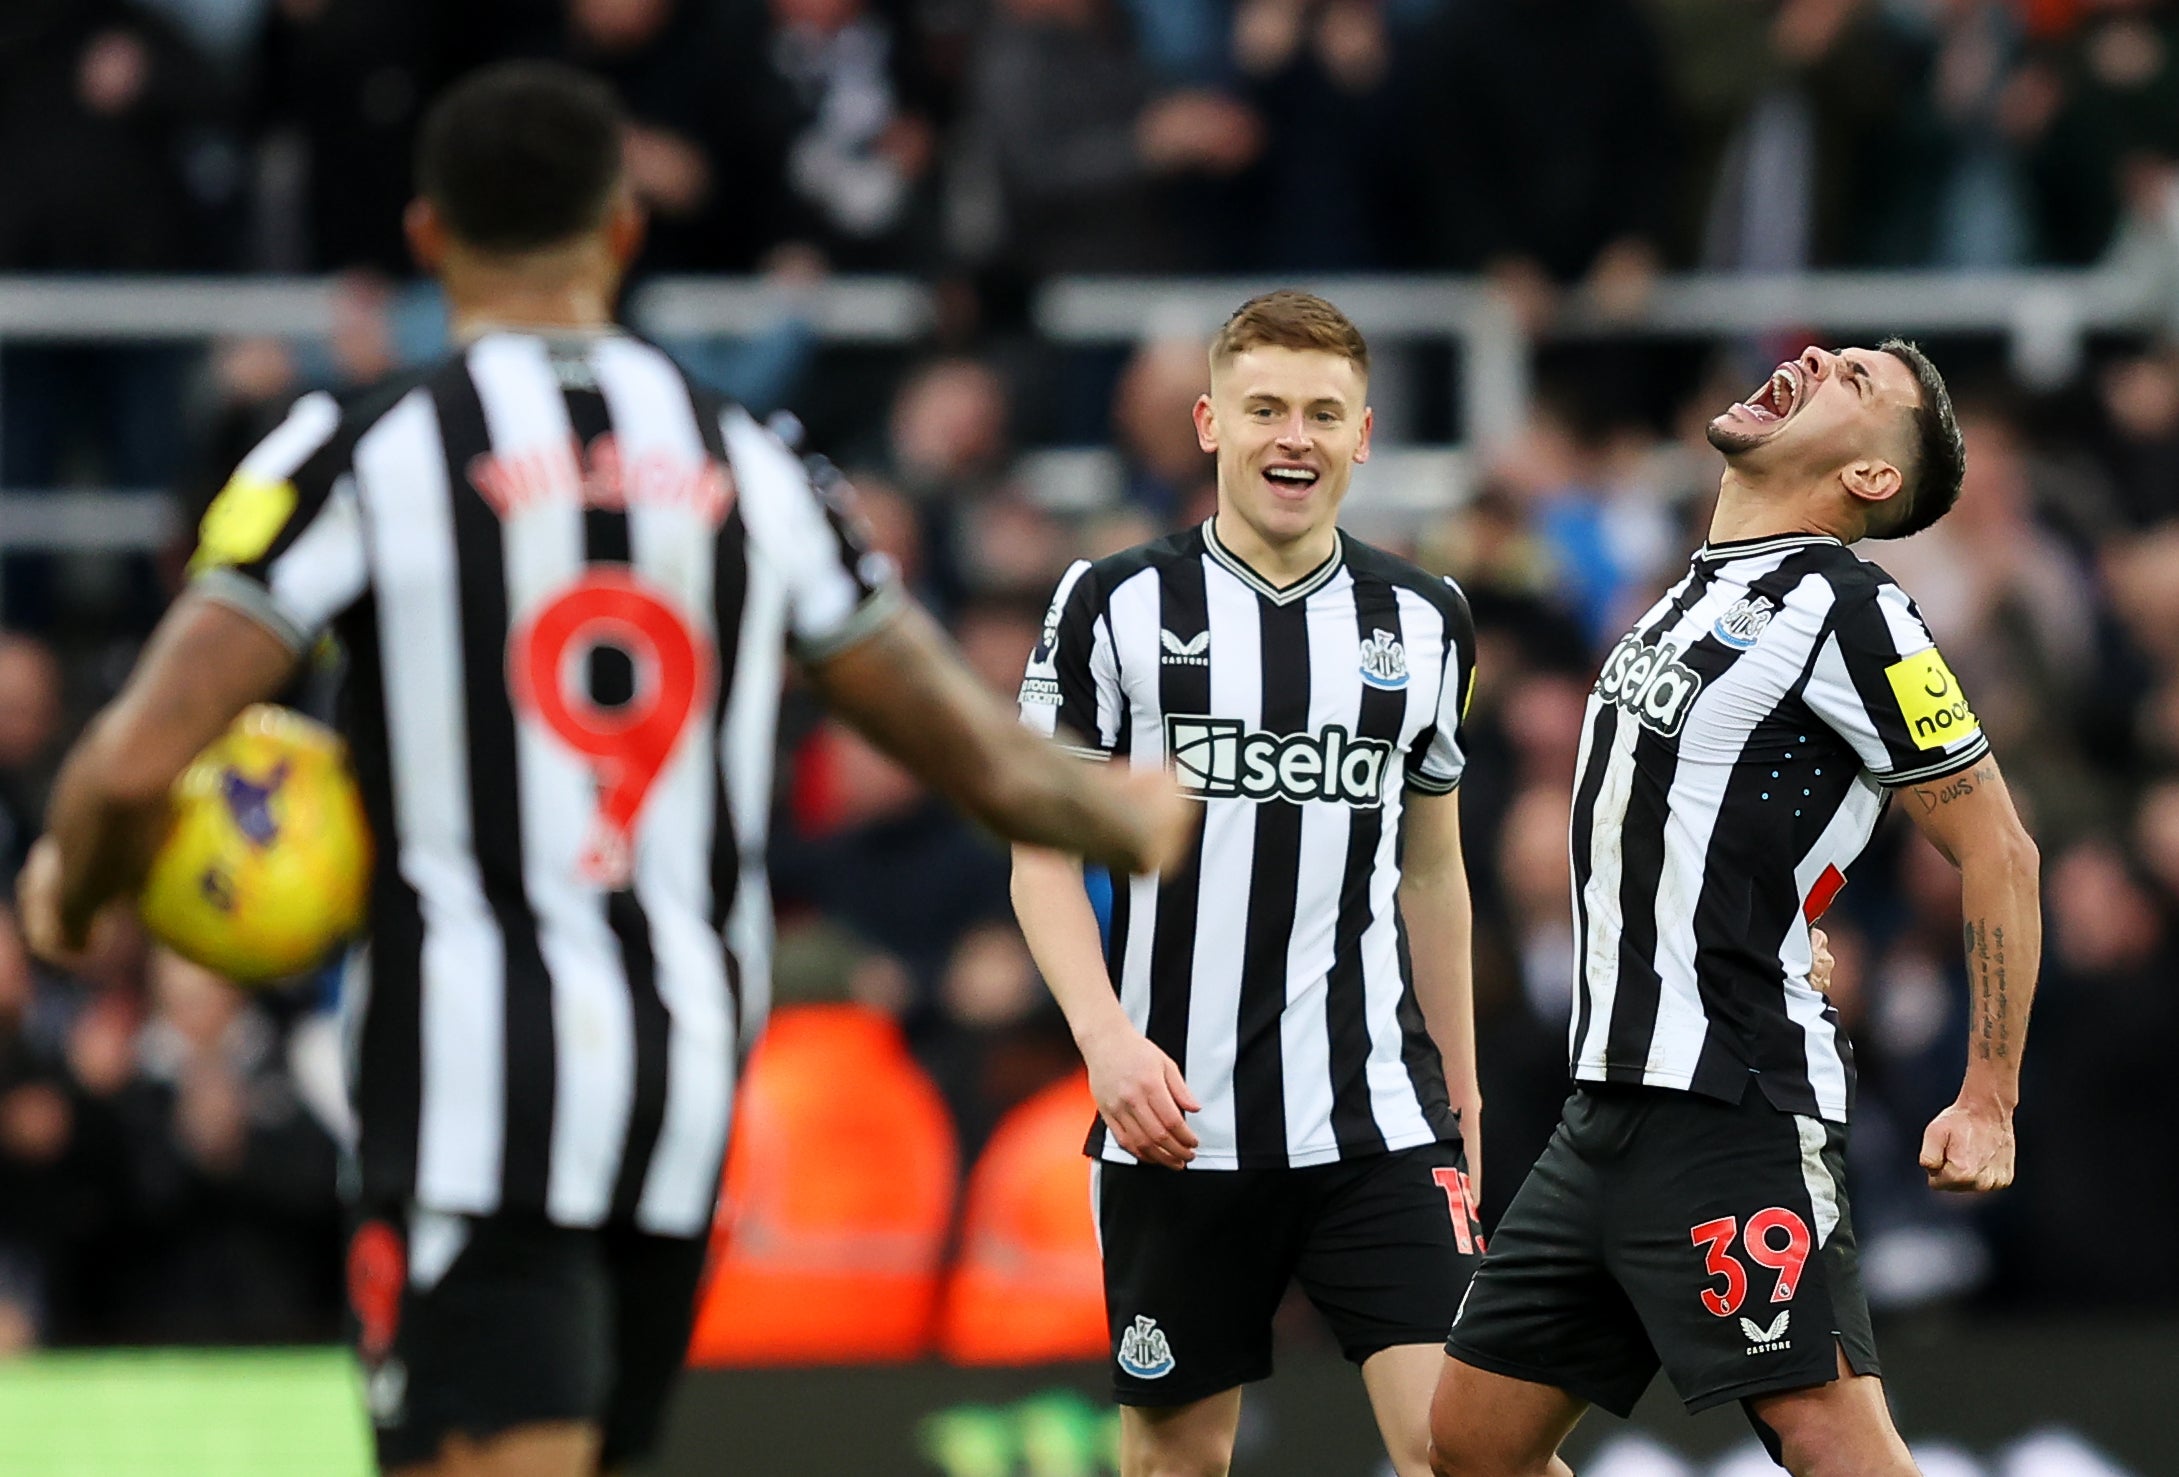 Newcastle came from behind to draw with Luton